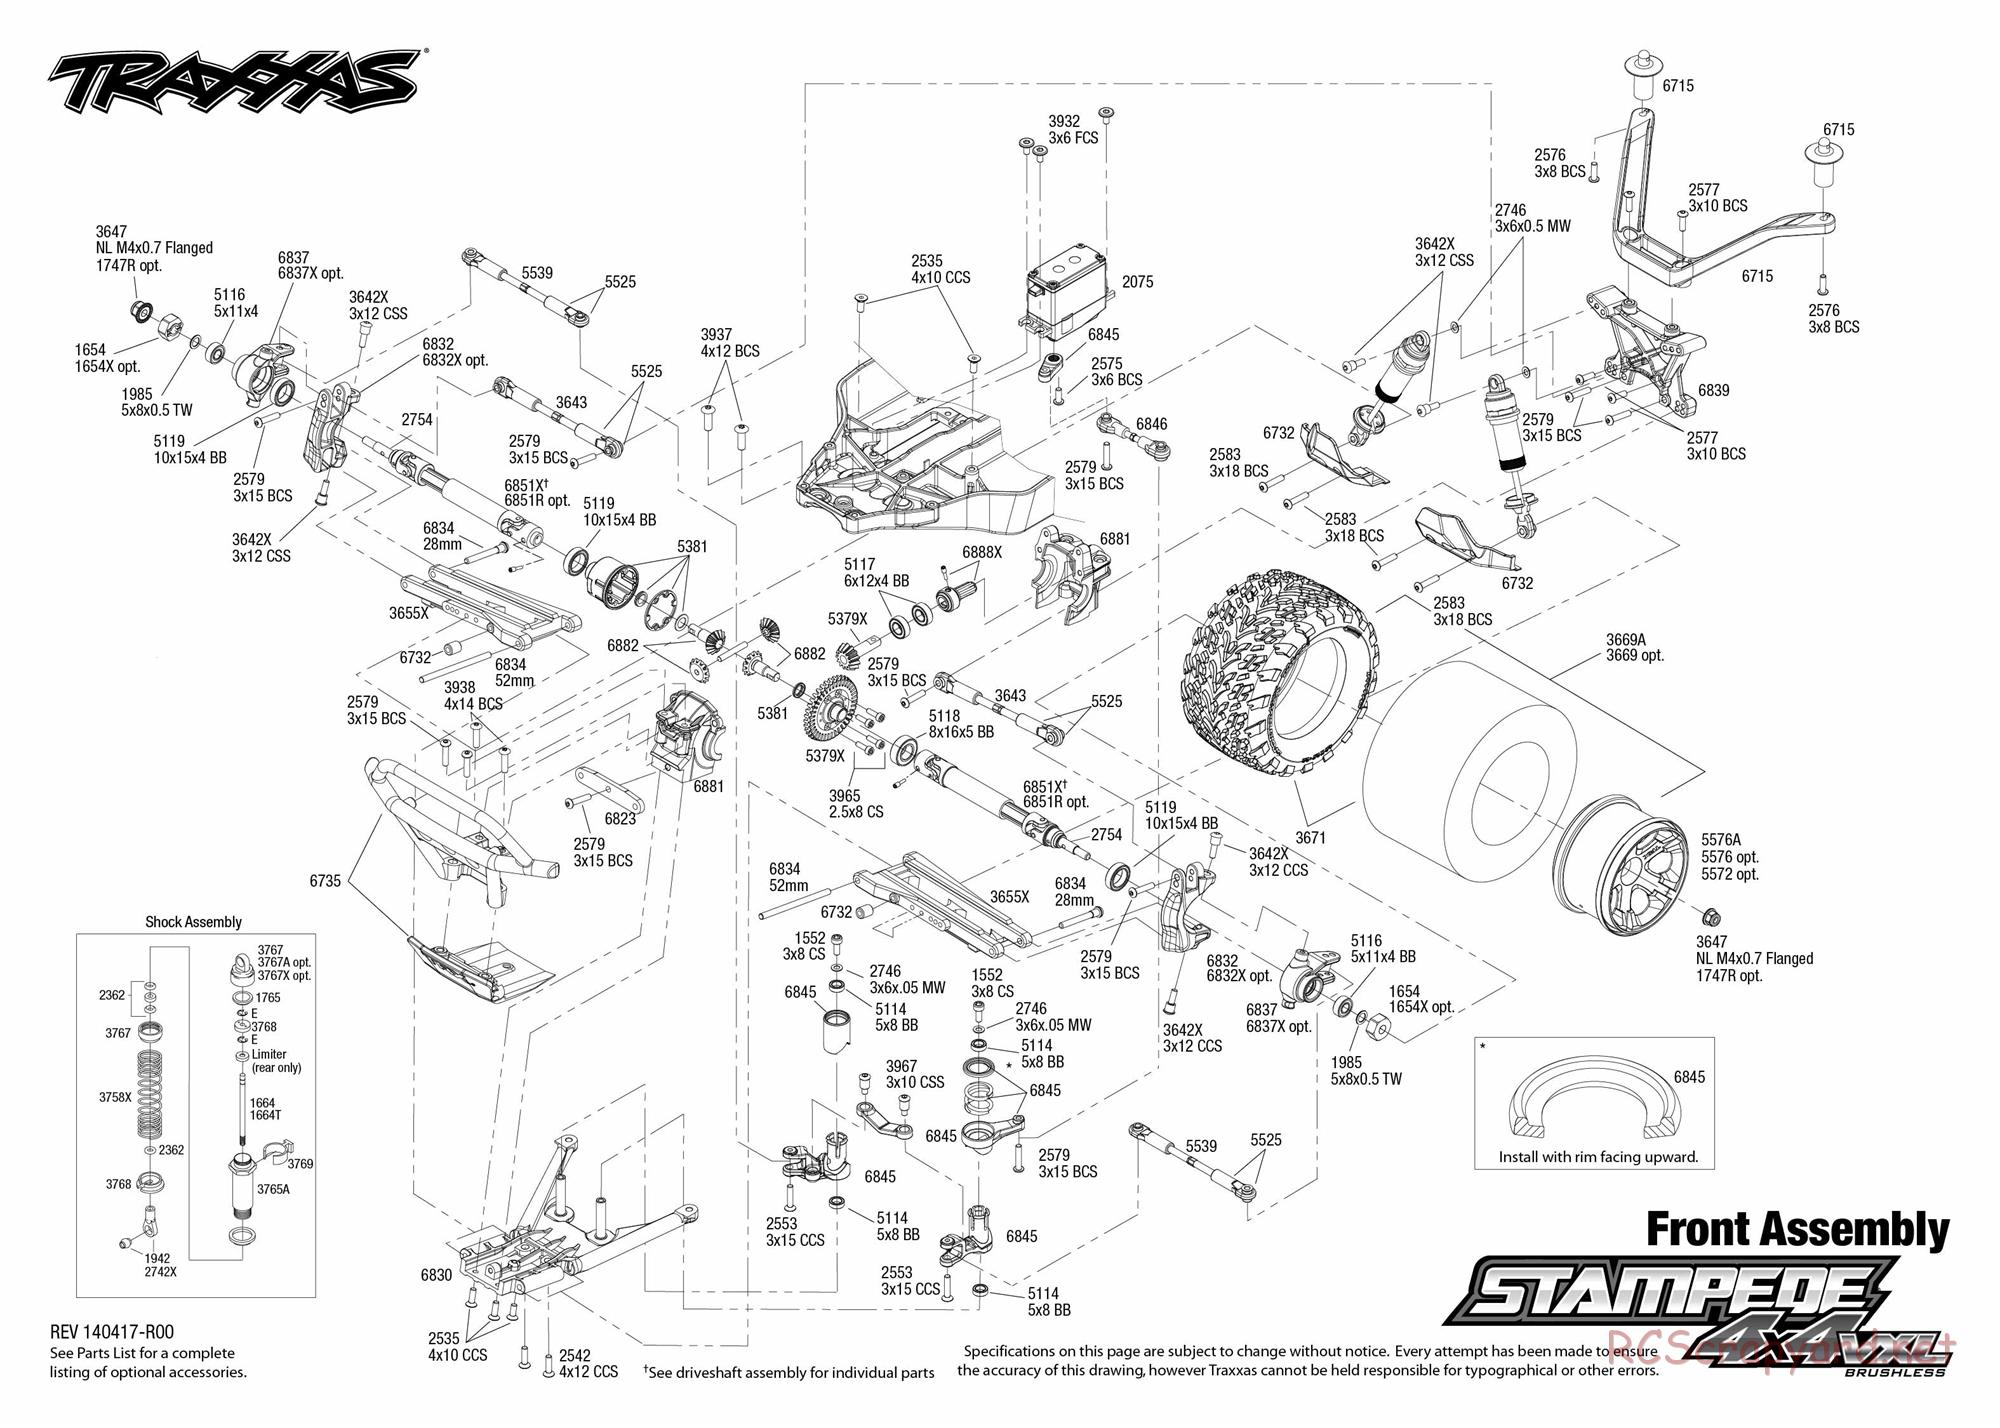 Traxxas - Stampede 4x4 VXL (2014) - Exploded Views - Page 3